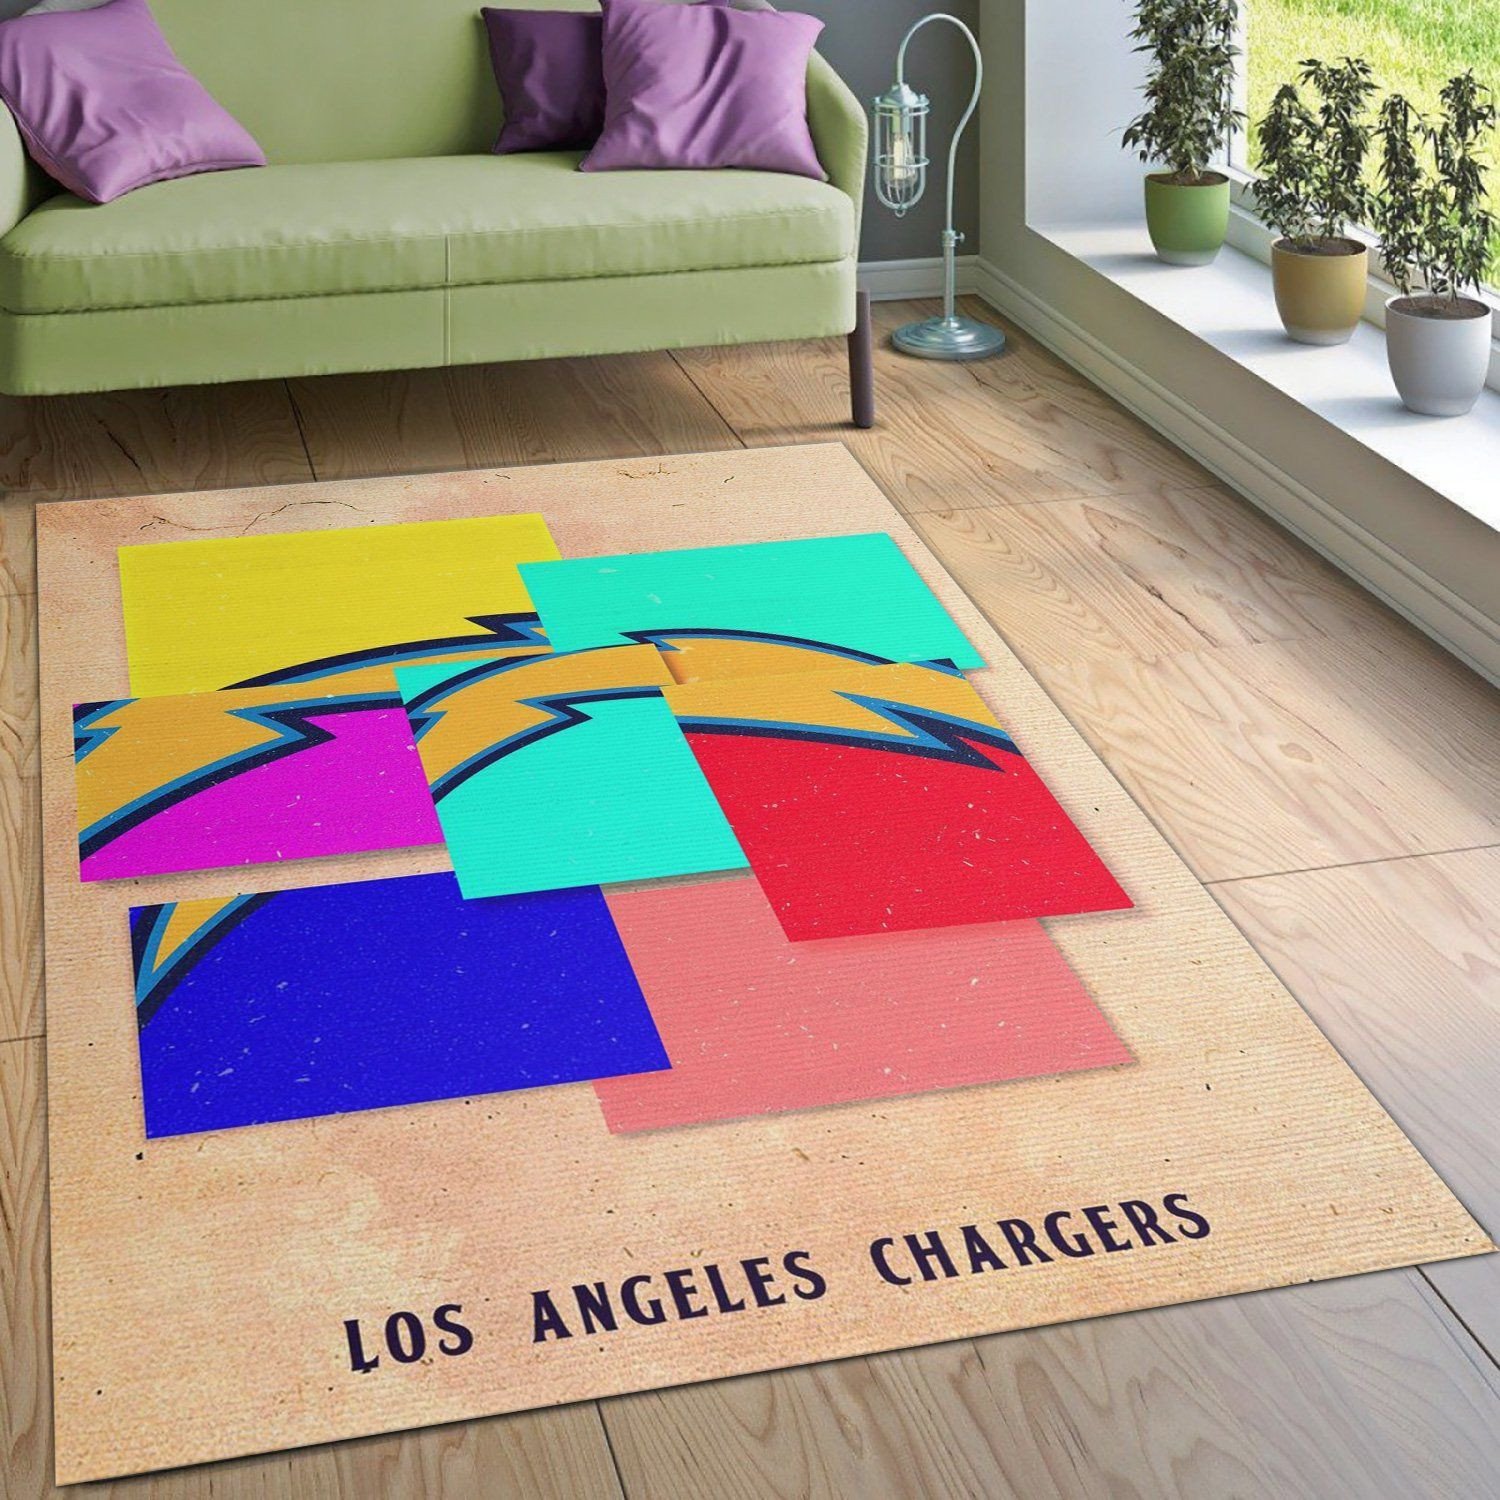 Los Angeles Chargers NFL Area Rug For Christmas Living Room Rug Christmas Gift US Decor - Indoor Outdoor Rugs 2